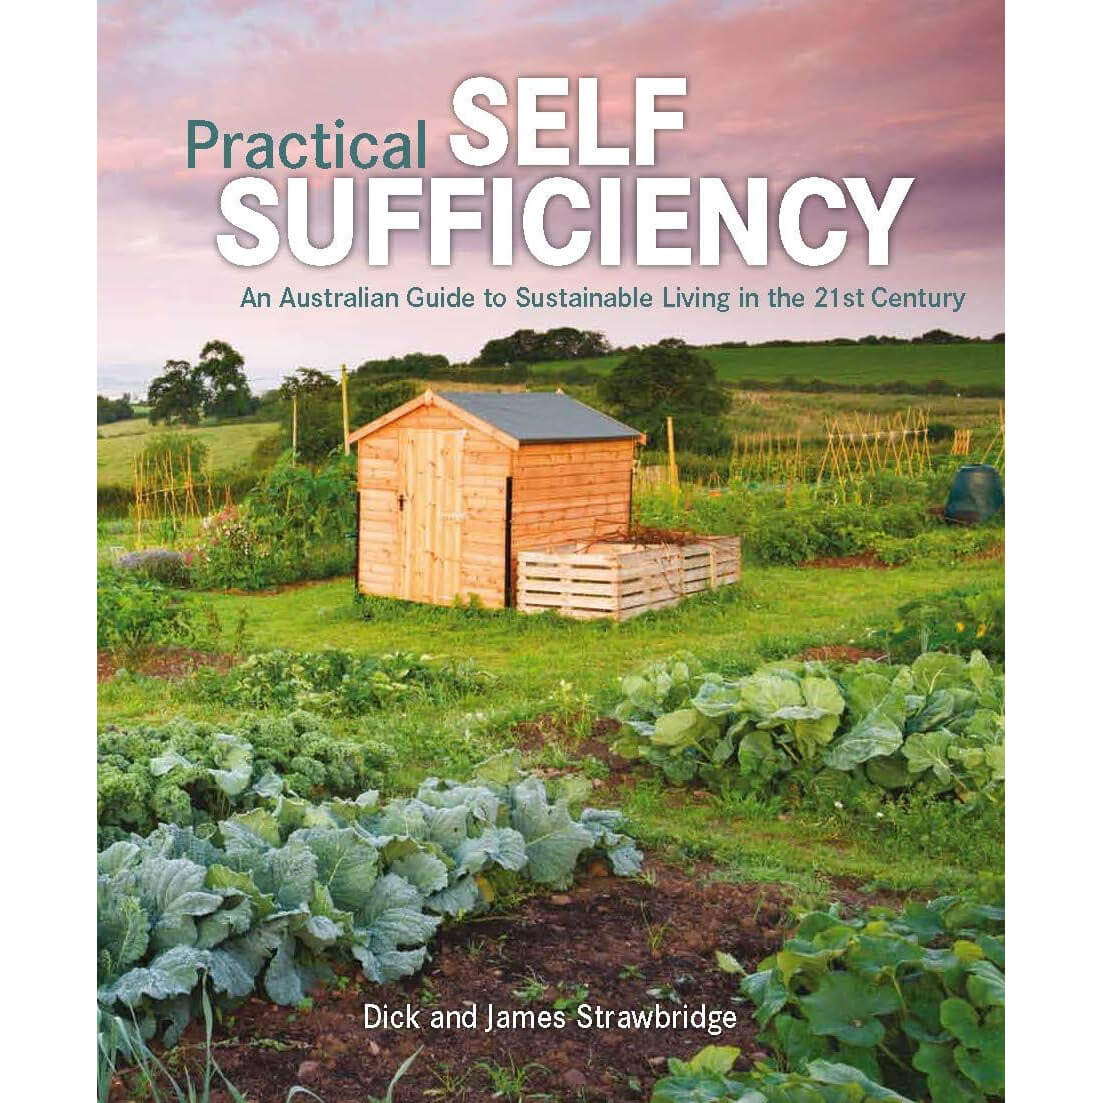 Practical Self Sufficiency: An Australian Guide to Sustainable Living in the 21st Century front cover.